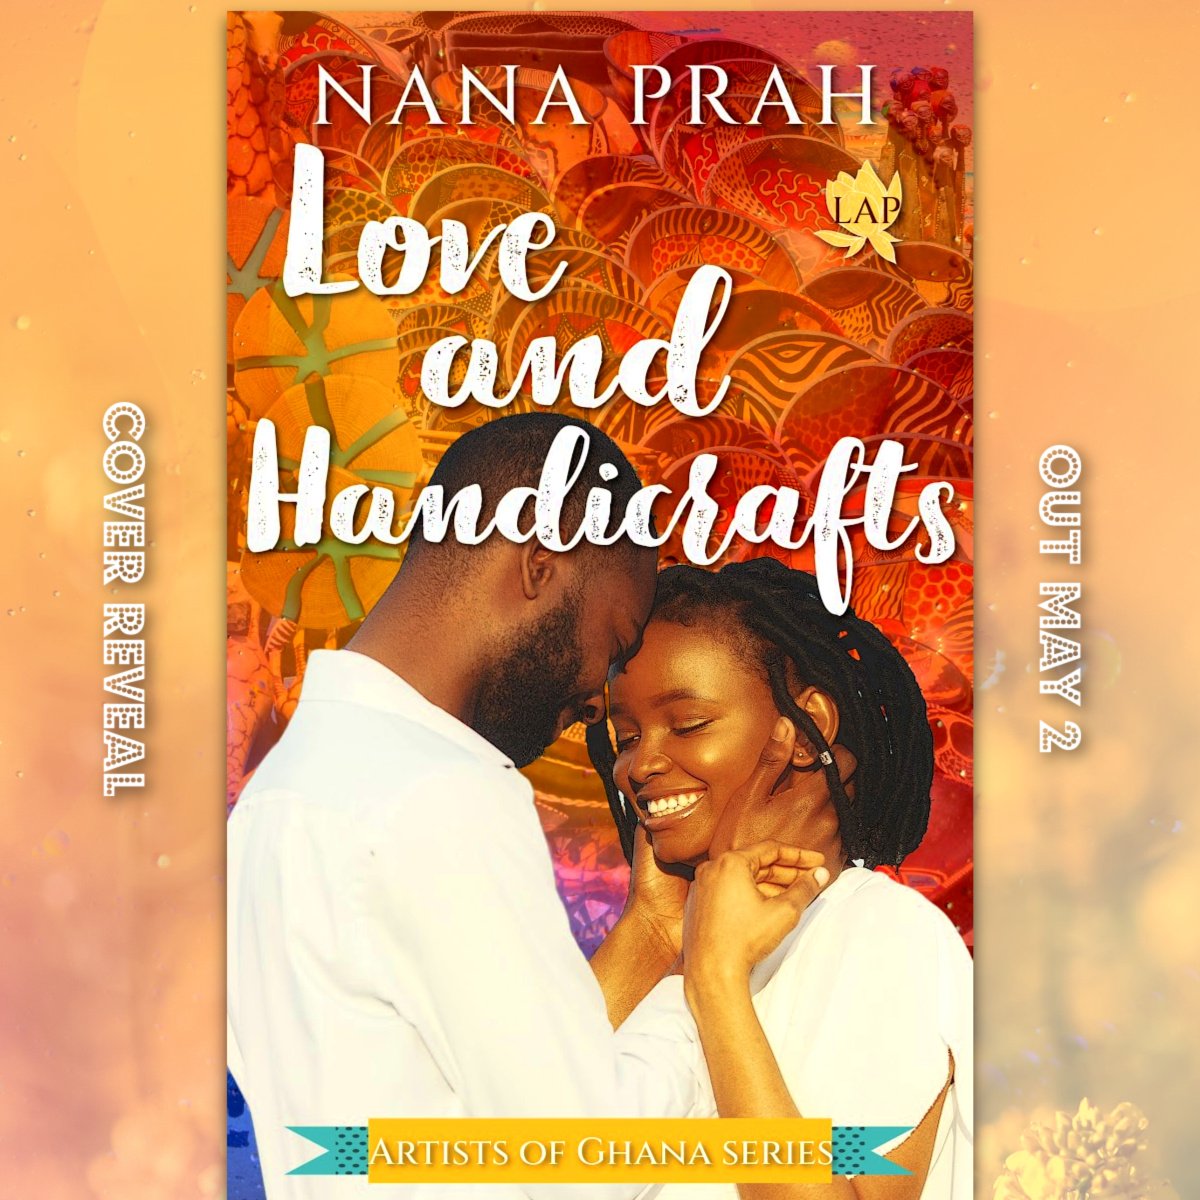 Cover reveal! I'm excited to show you the cover of book 2 in the Artists of Ghana series.  Out May 2nd! 💃🏾 #coverreveal #loveafricapress
#africanromance
#ContemporaryRomance #Ghana